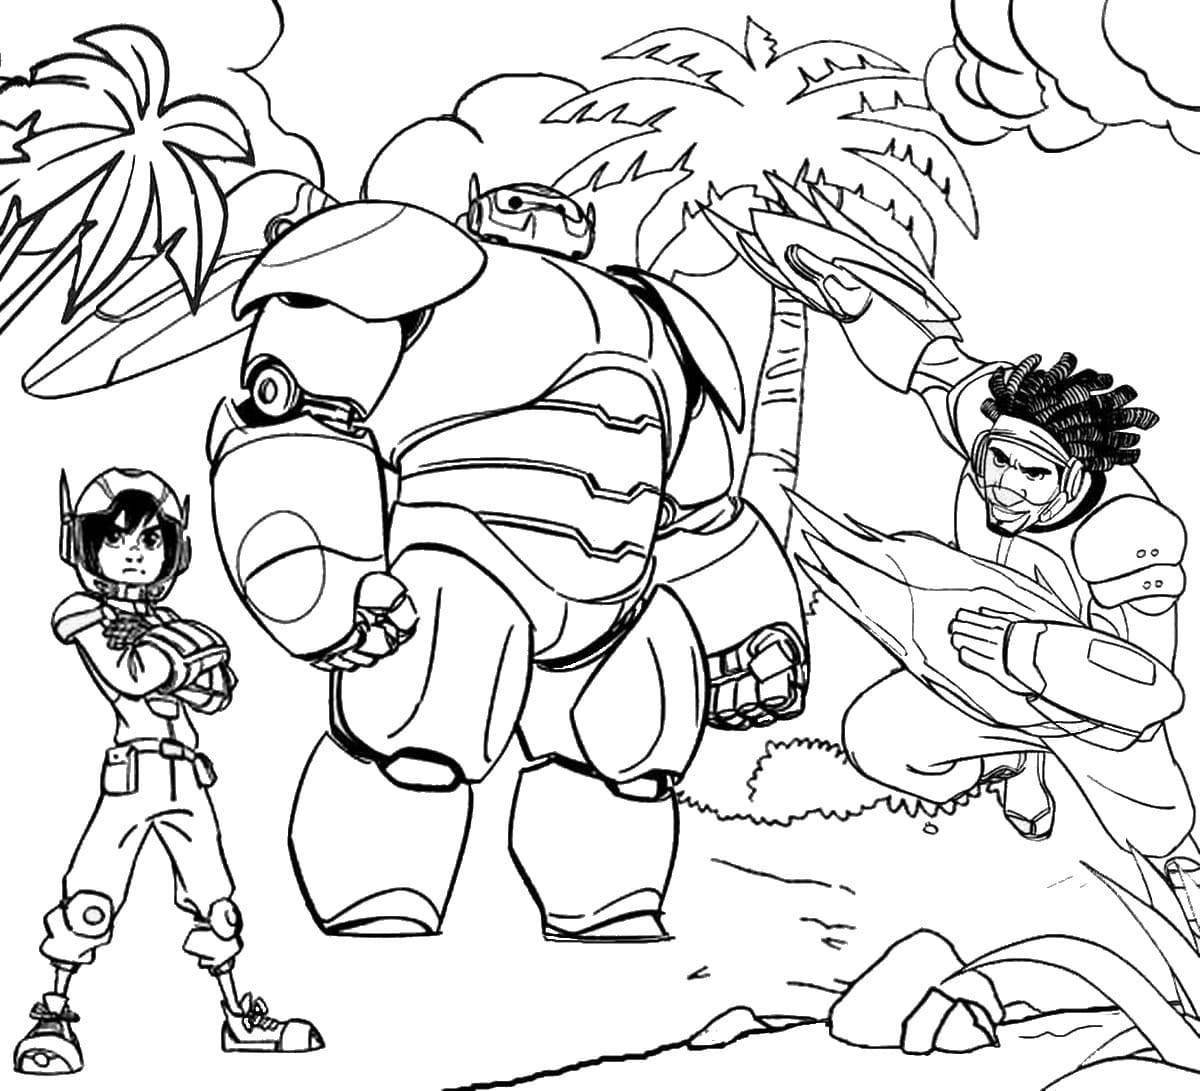 Crazy New Hero 2 coloring page